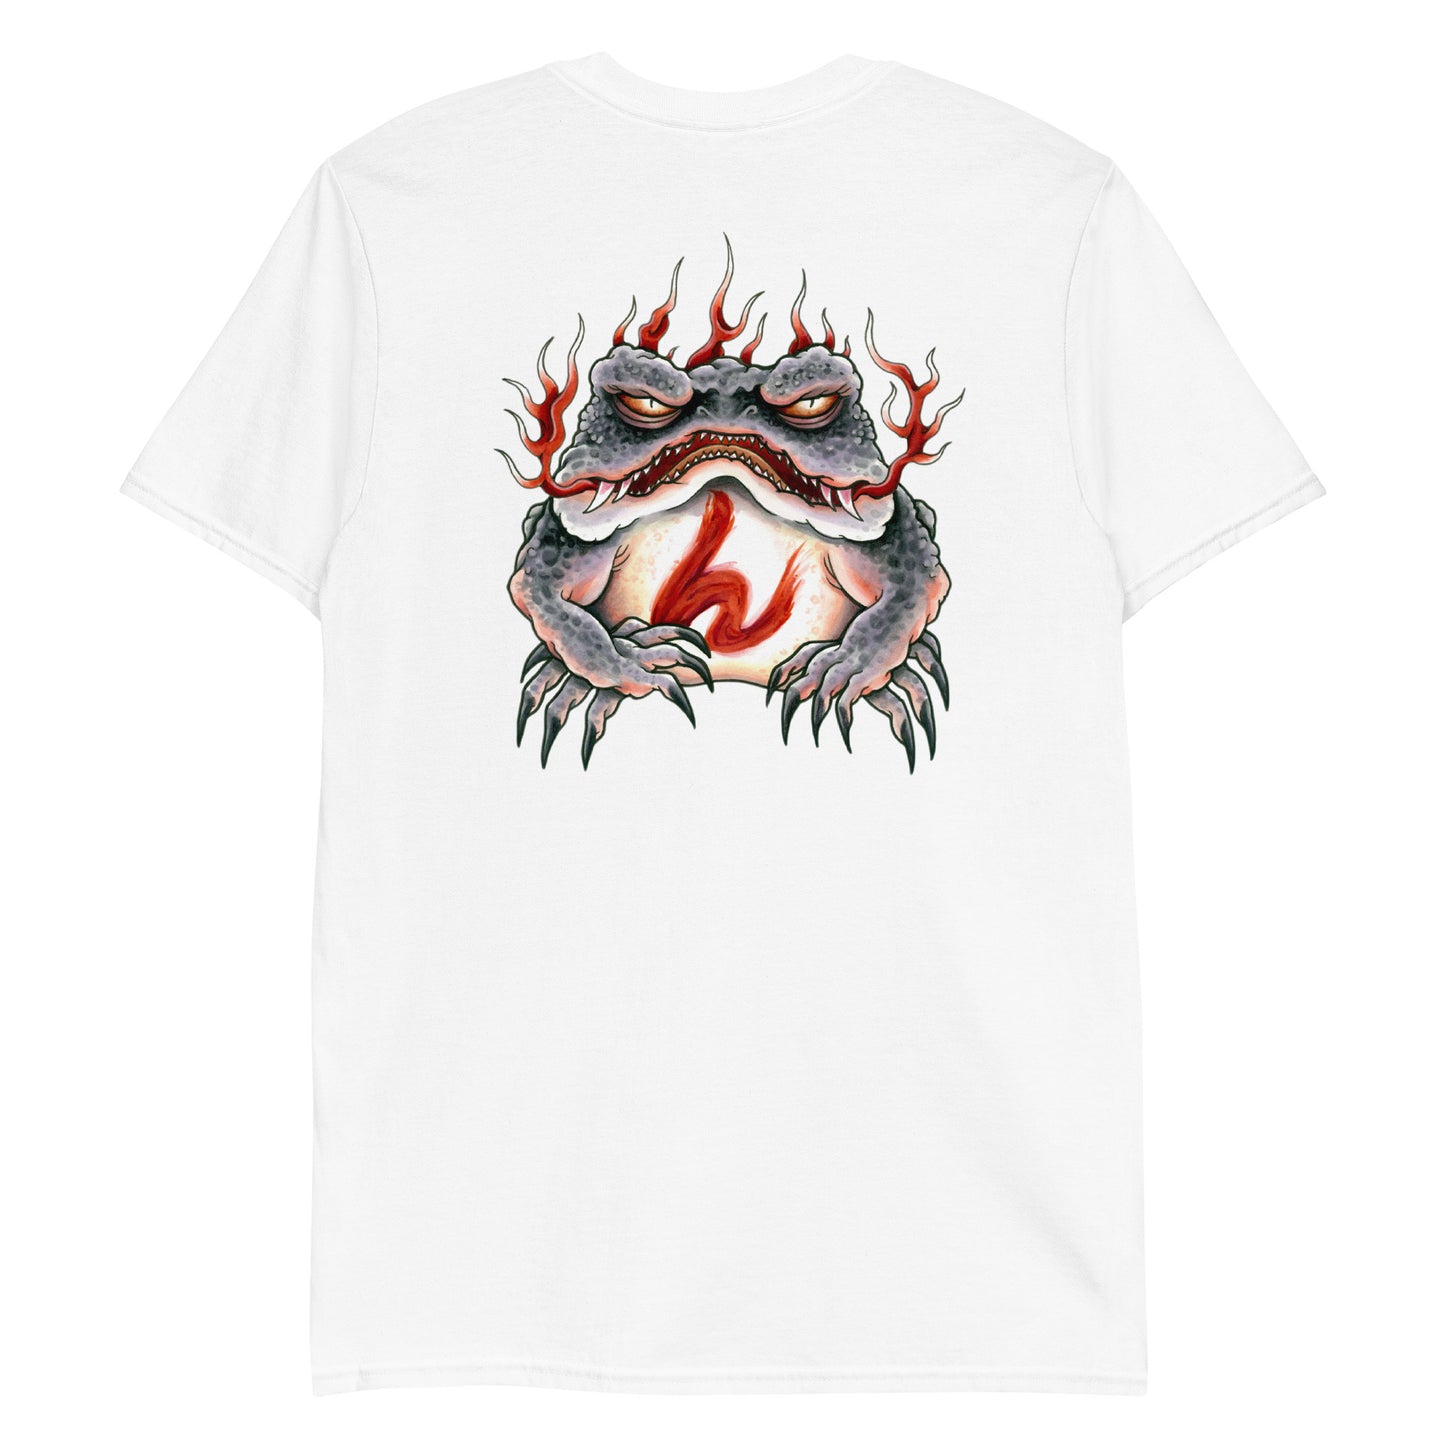 “Fight till you die” - Gaman Toad Unisex T-Shirt (white)